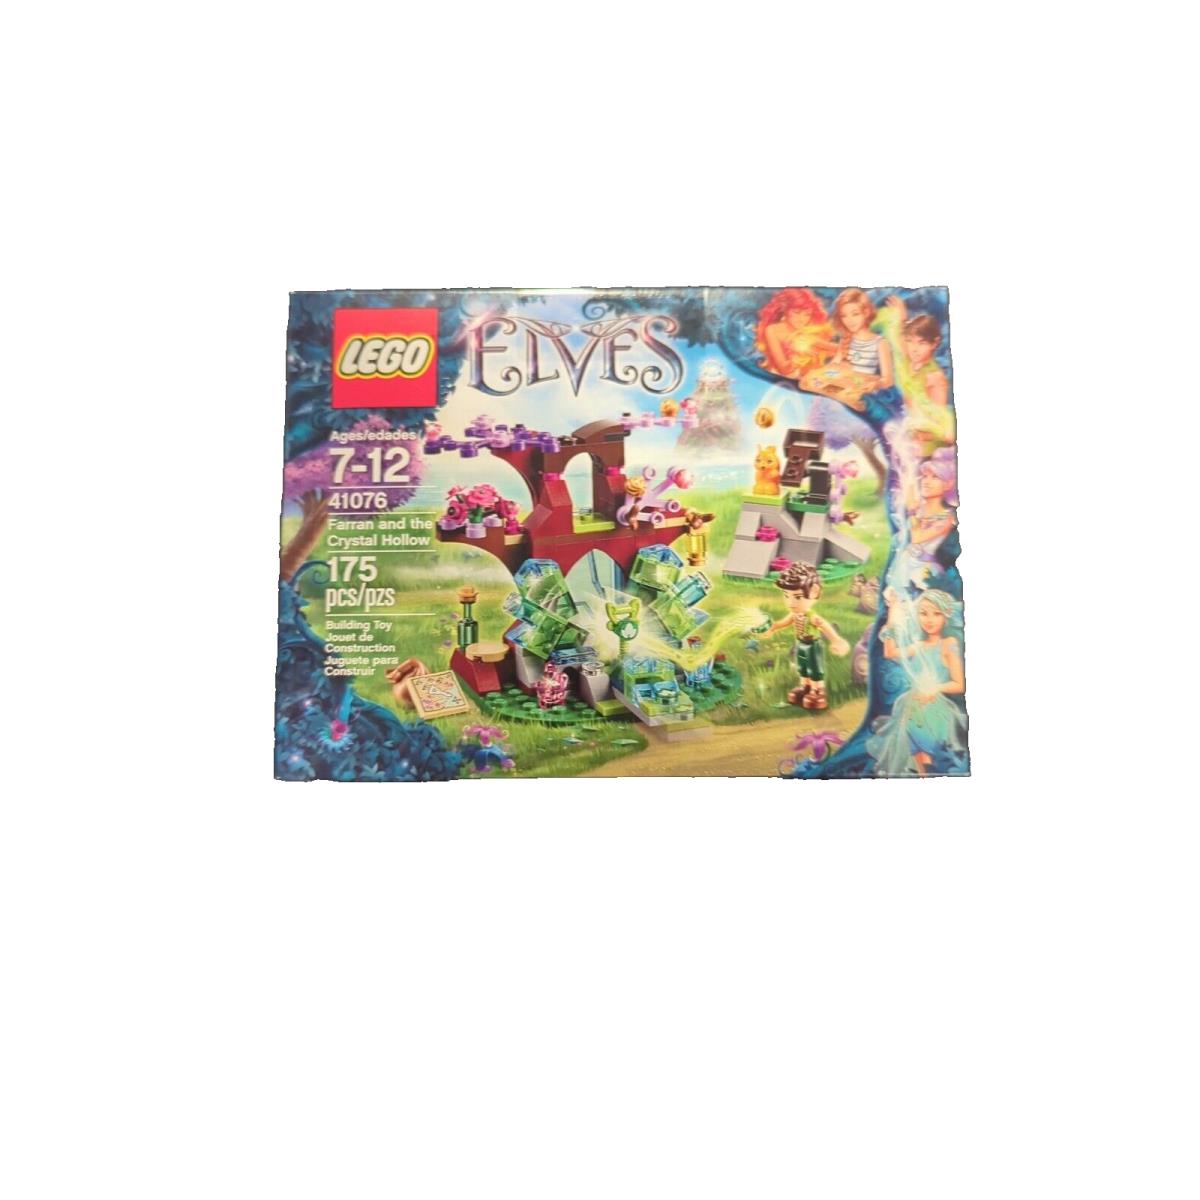 Lego Elves: Farran and The Crystal Hollow 41076 - Retired